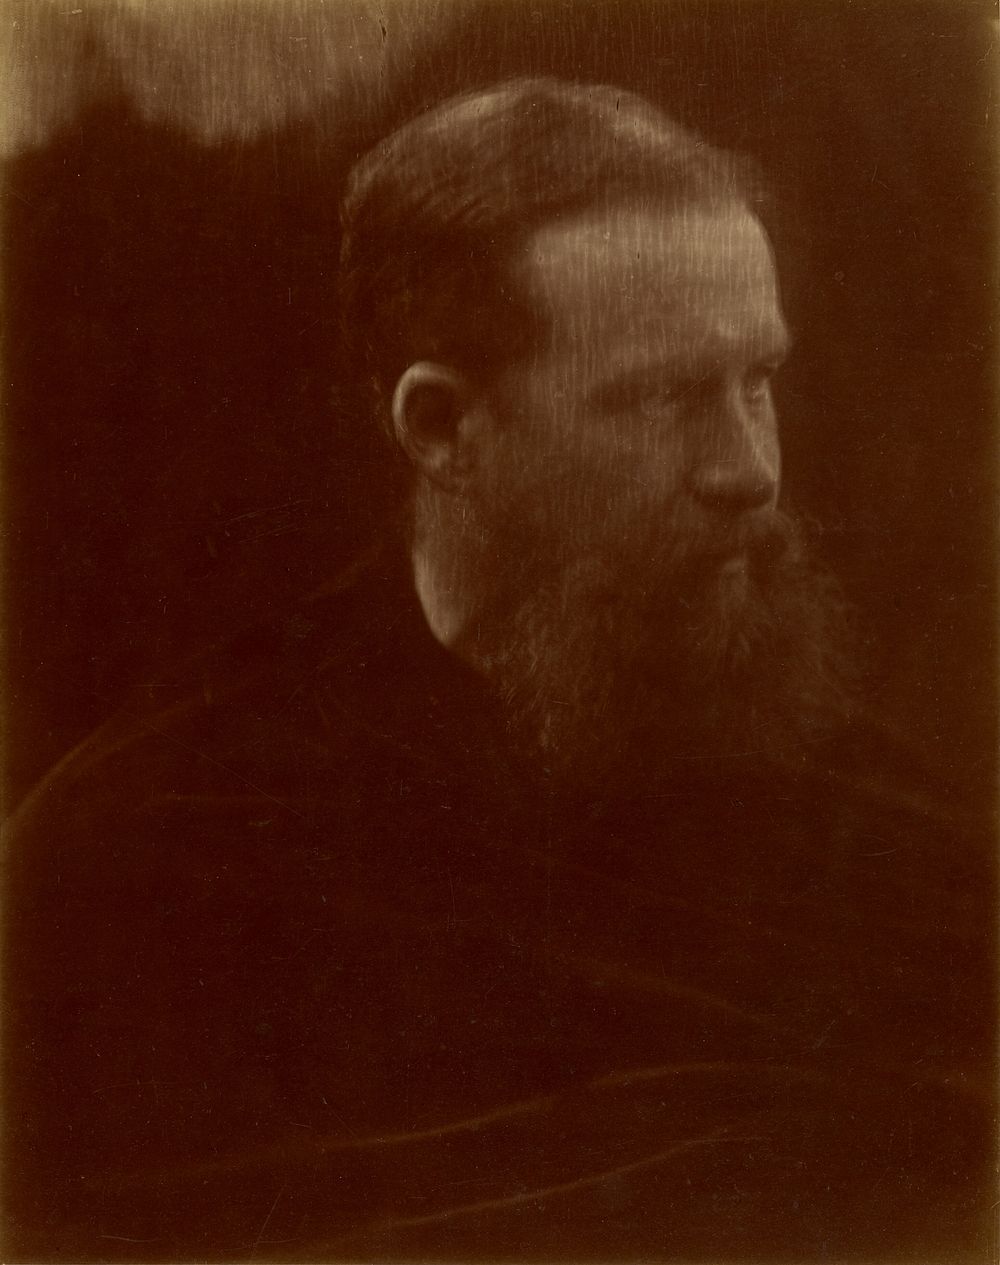 Portrait of Man with Beard by Julia Margaret Cameron